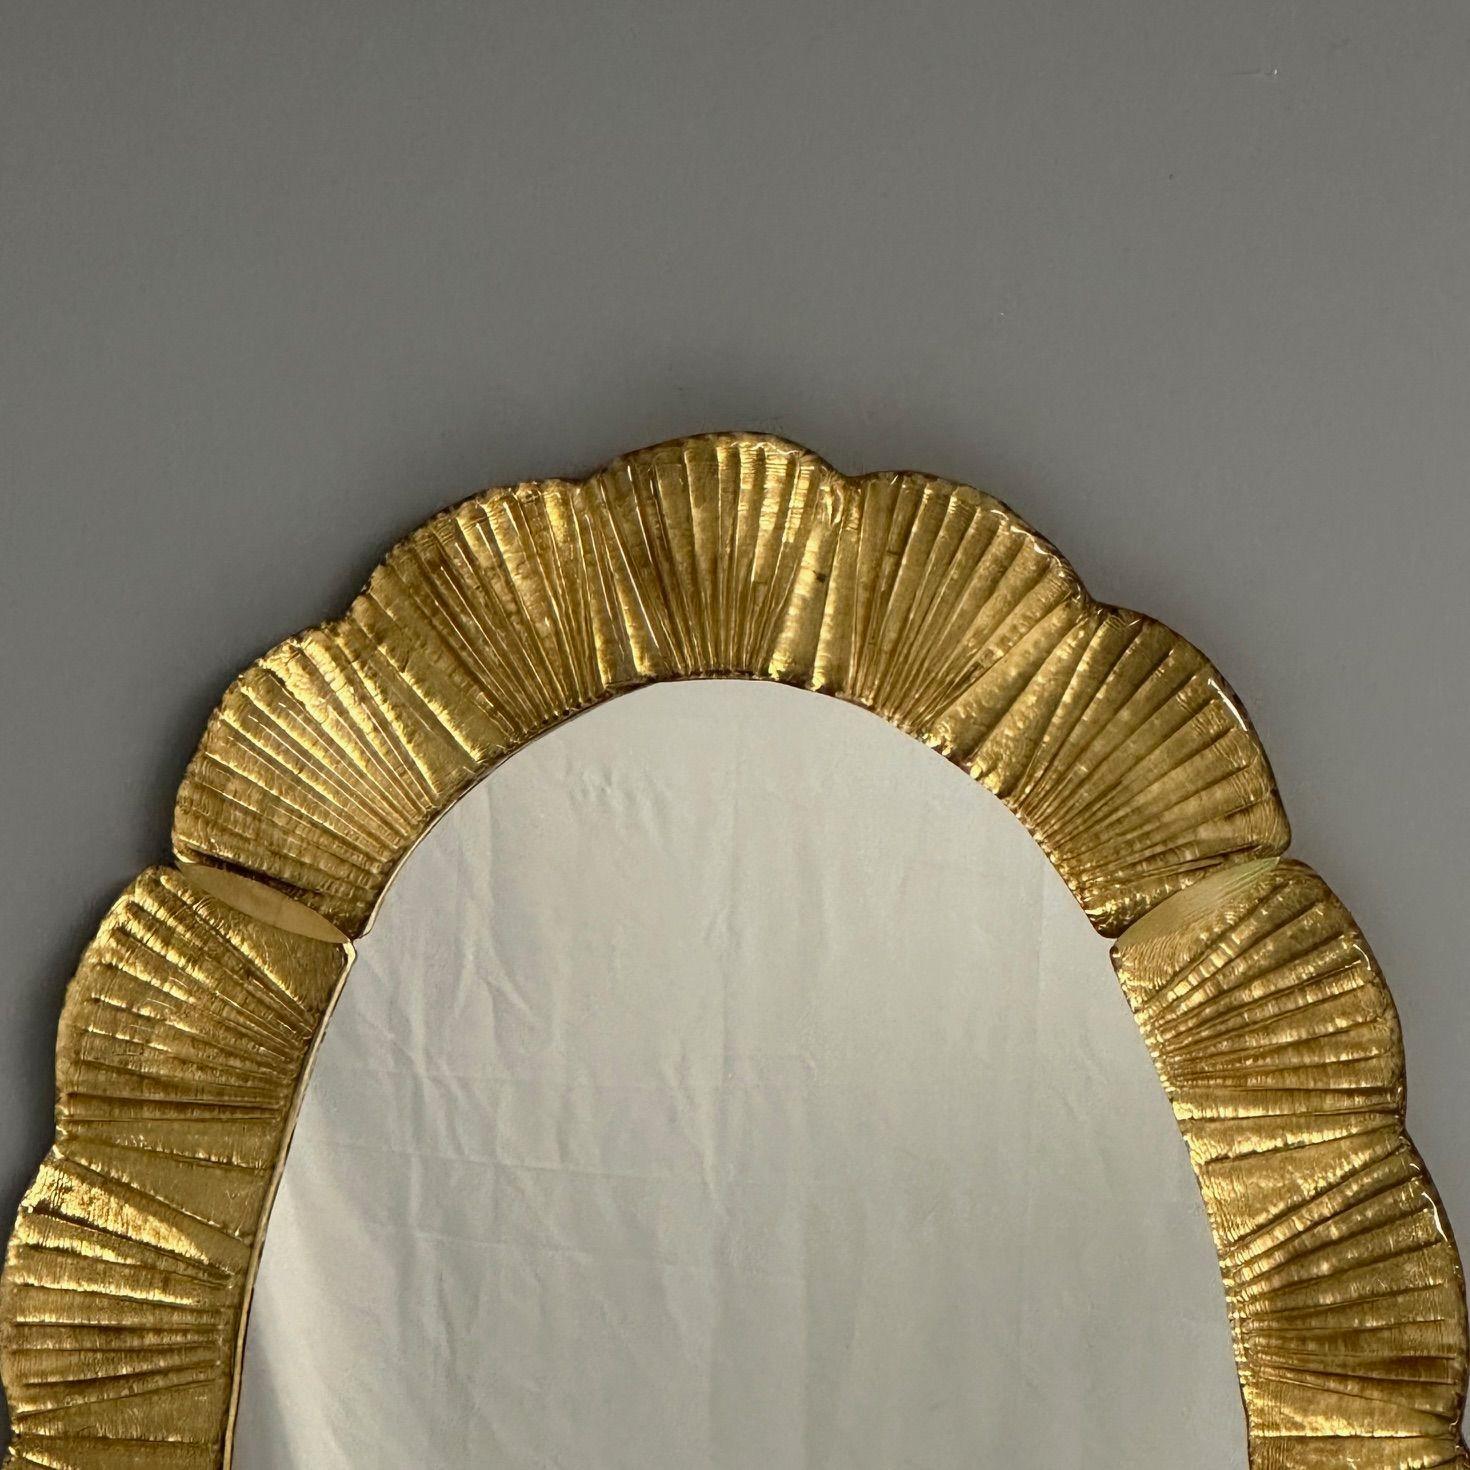 Contemporary, Oval Wall Mirrors, Scallop Motif, Murano Glass, Gilt Gold, Italy For Sale 2